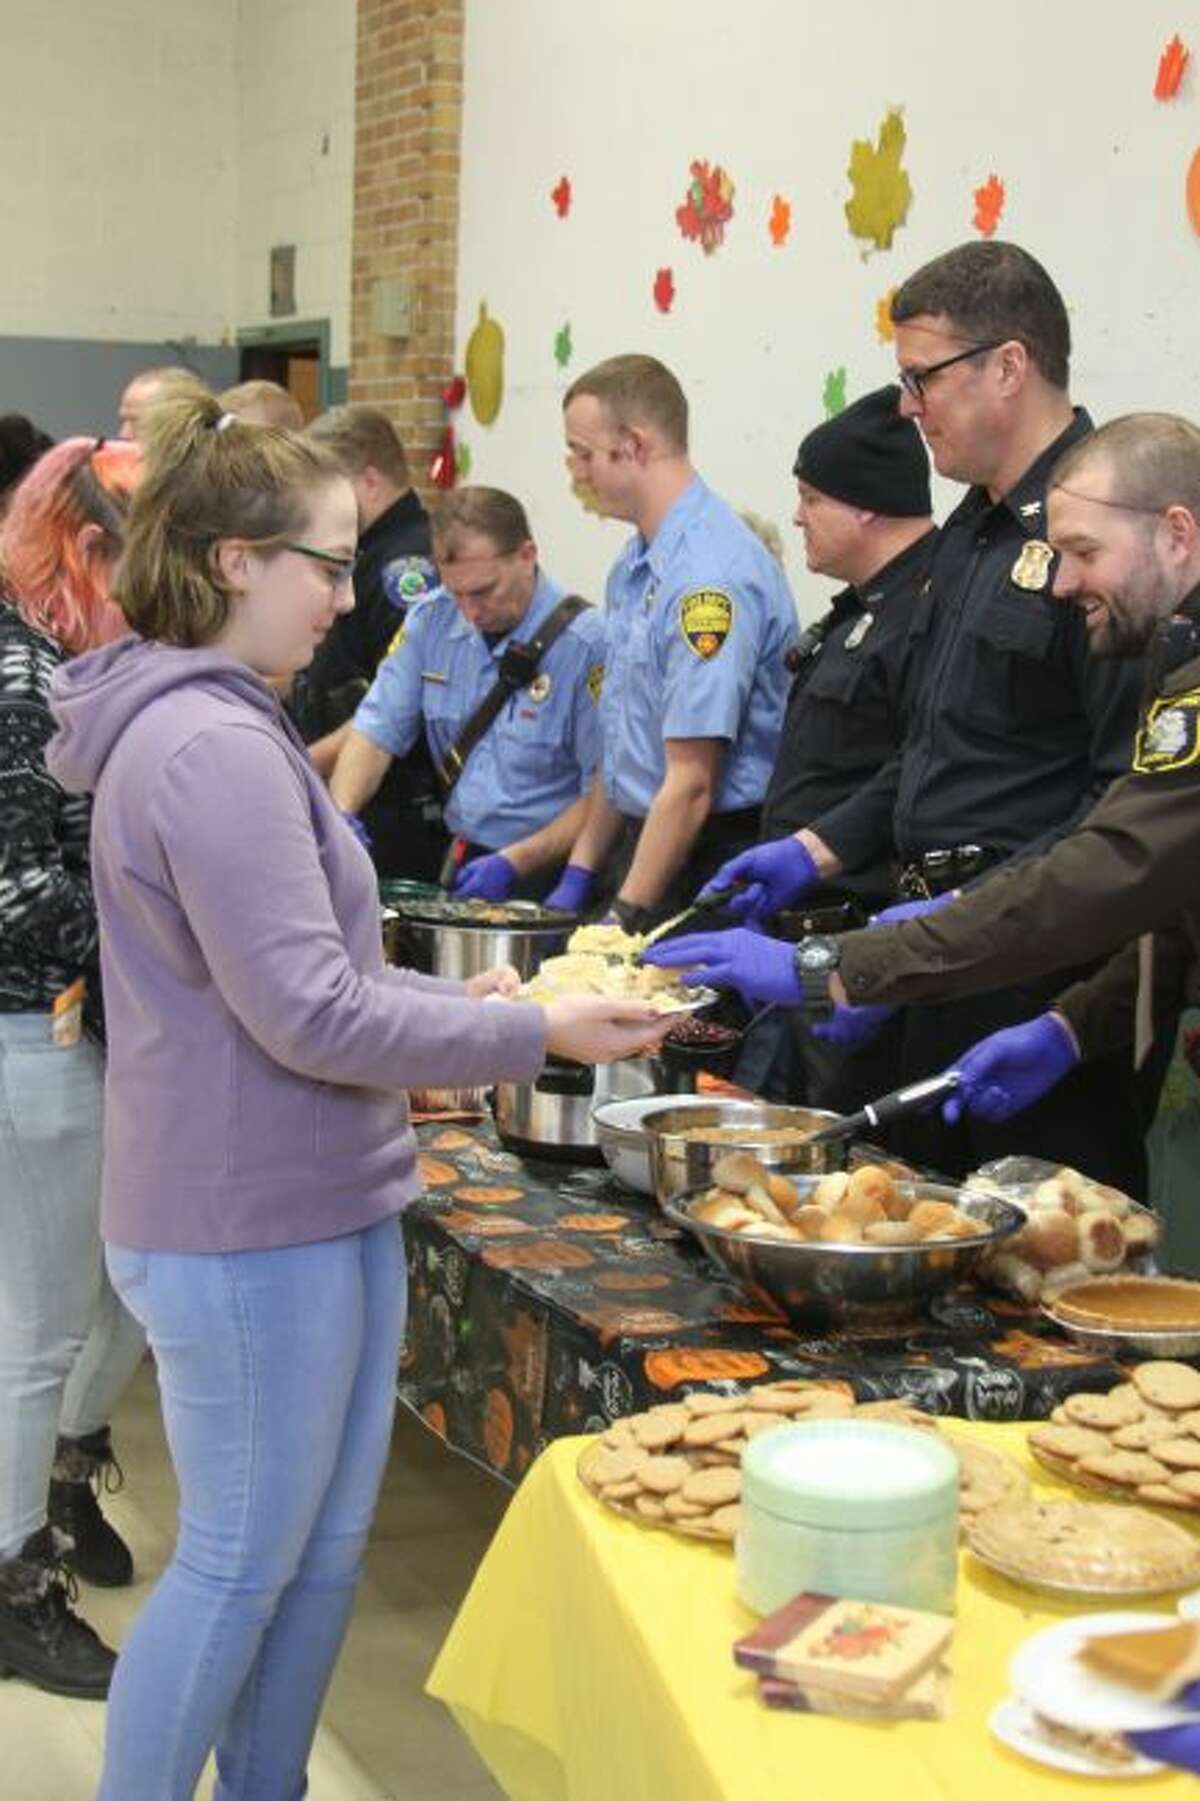 CASMAN Academy students celebrated their annual Thanksgiving Feast dinner on Tuesday at the school. Local members of law enforcement and fire departments worked as servers on the dinner that was prepared by staff and volunteers.